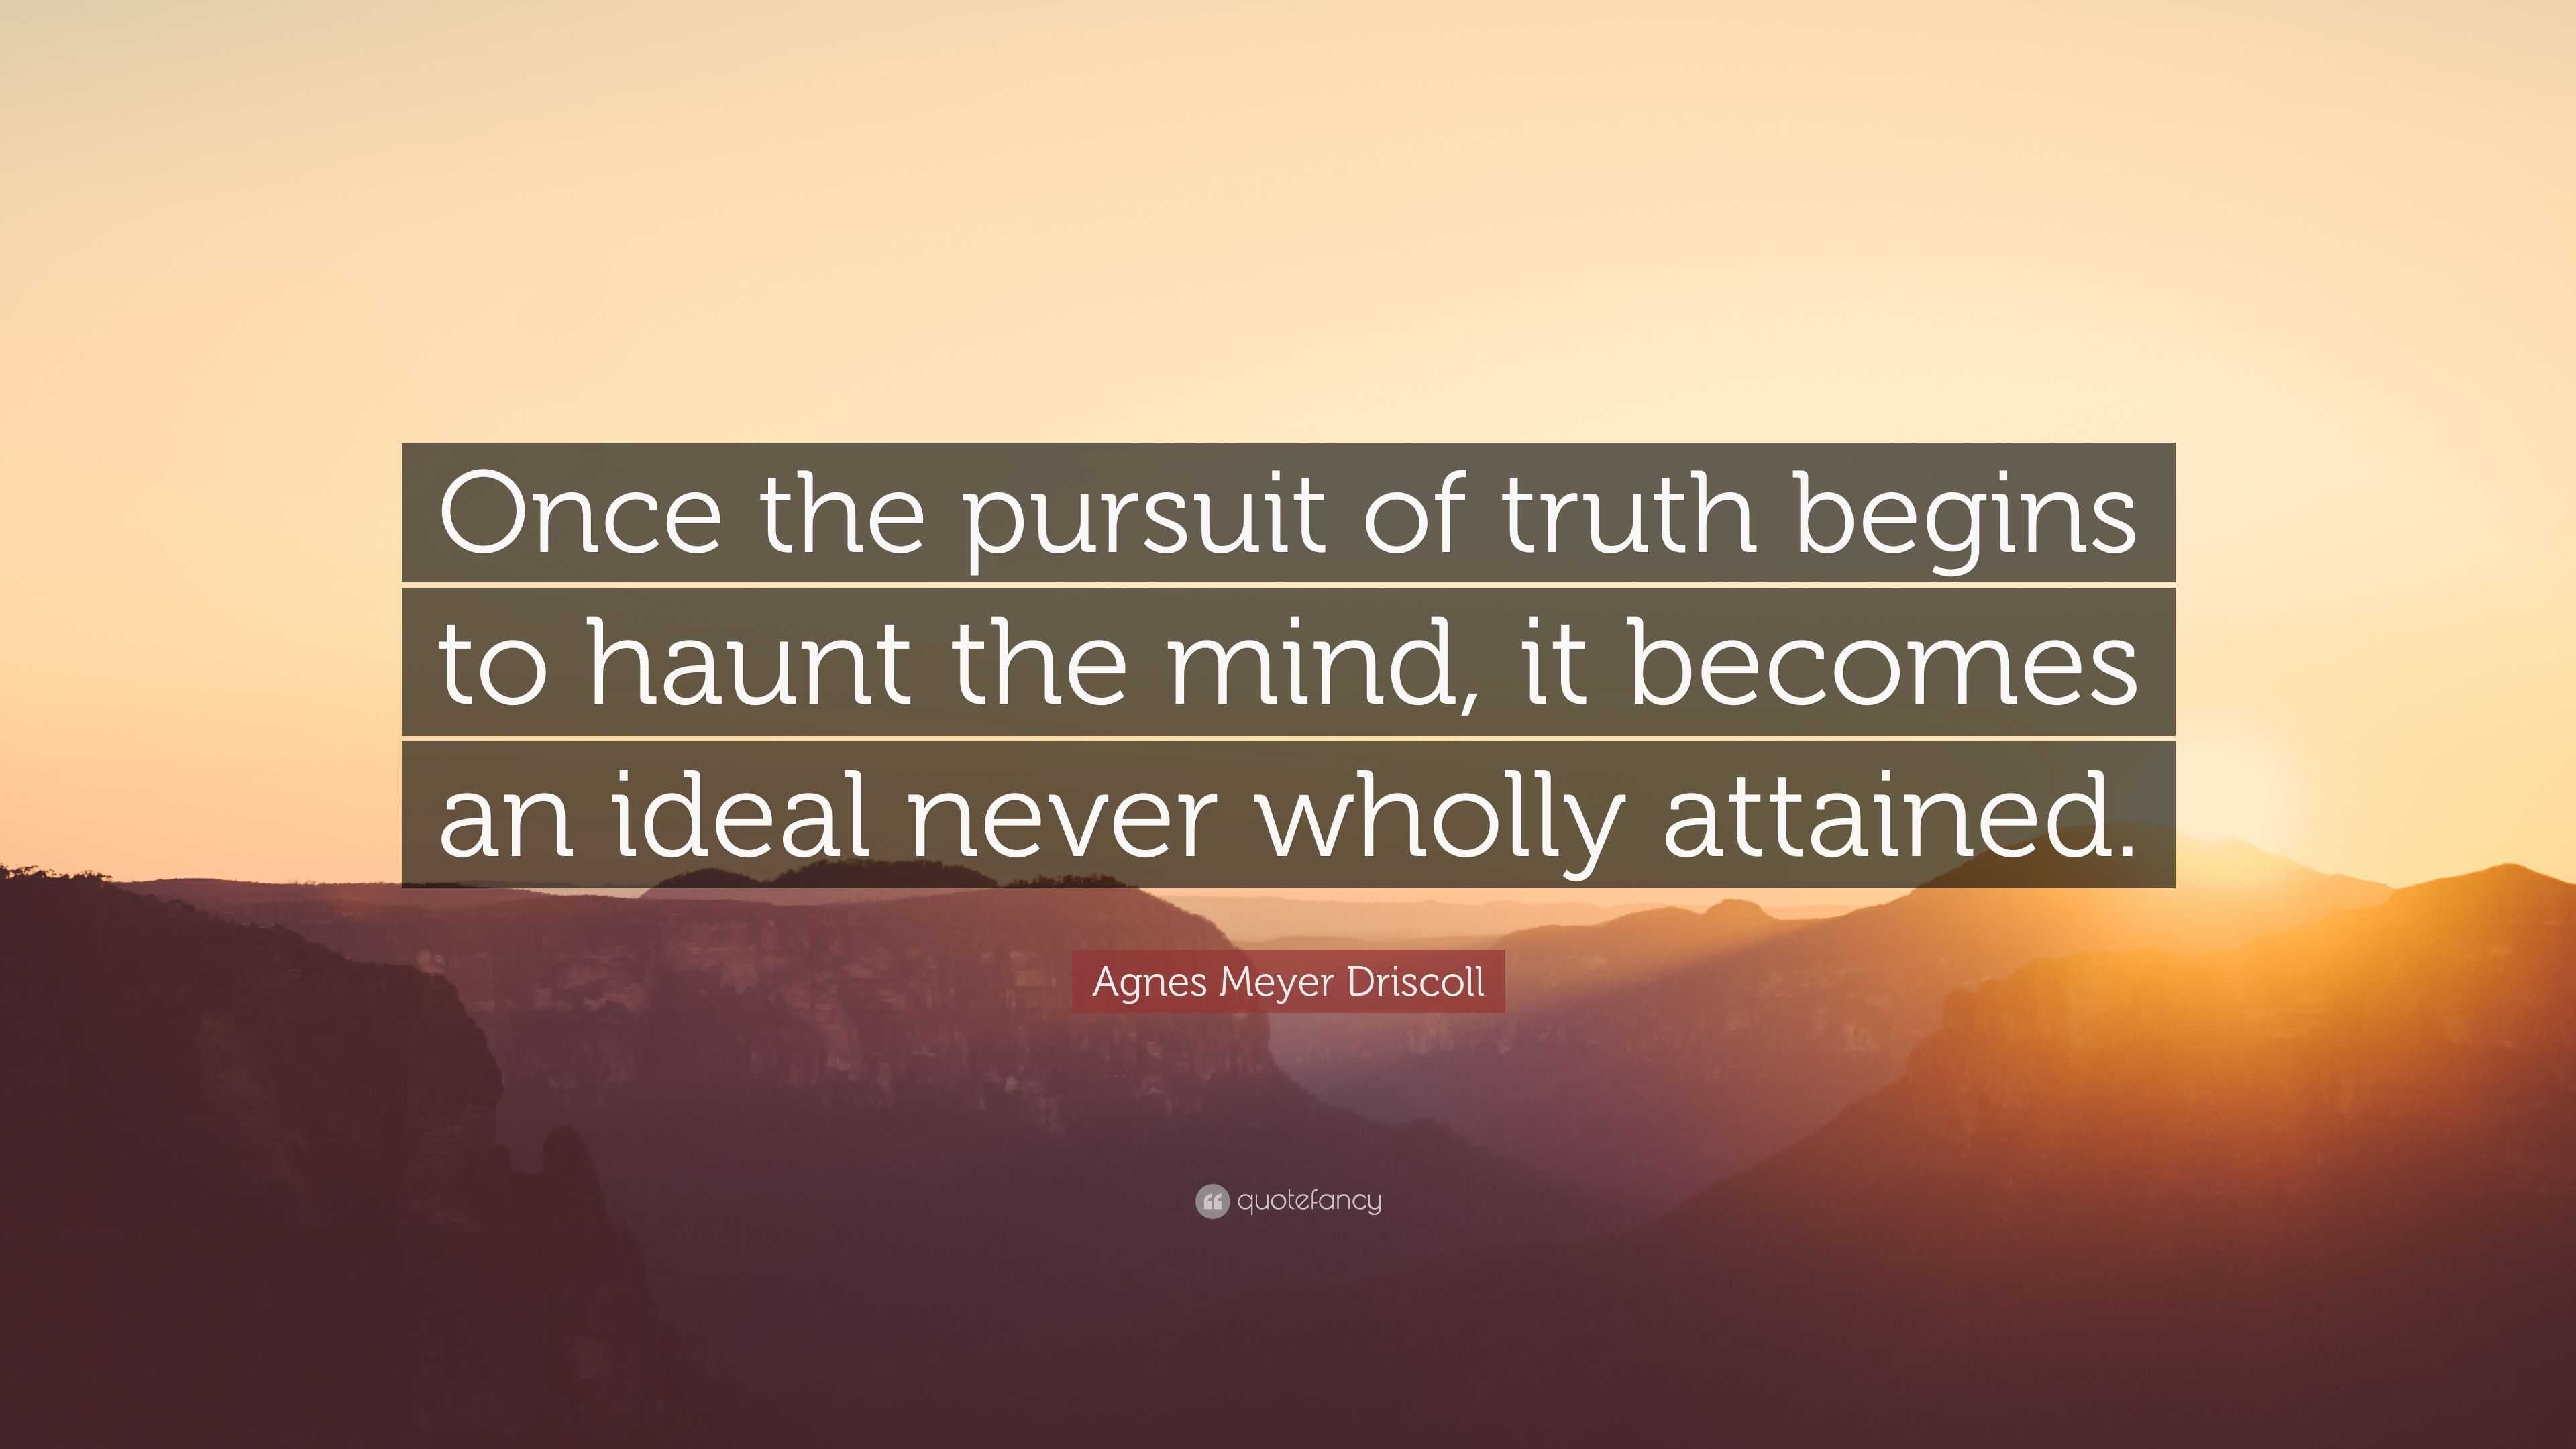 Agnes Meyer Driscoll Quote: “Once the pursuit of truth begins to haunt ...